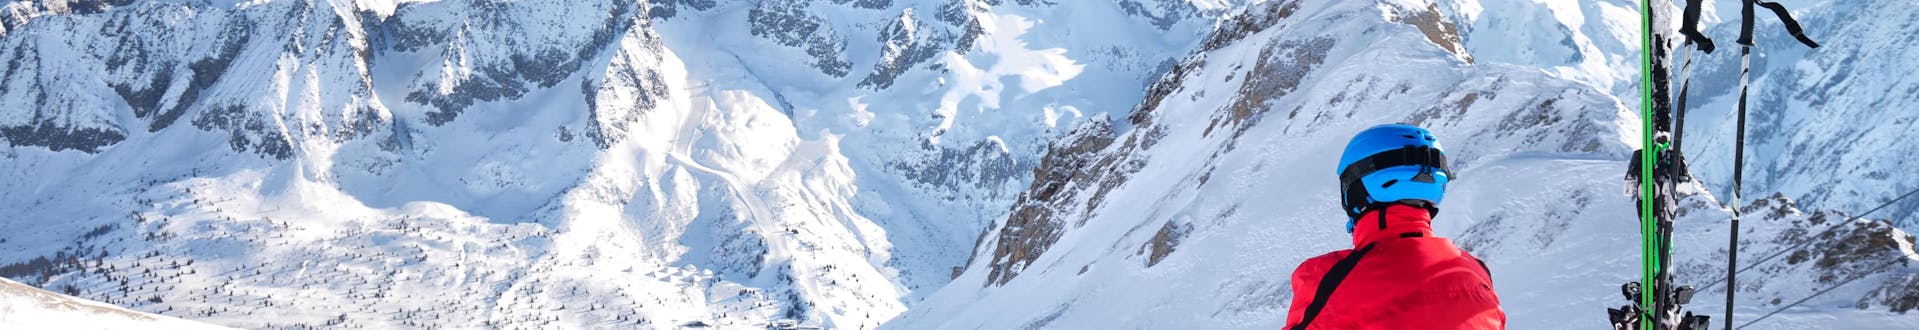 A skier is sitting in the snow at the top of the ski slope, looking down over the ski resort of Passo del Tonale, where visitors can book ski lessons with one of the local ski schools.